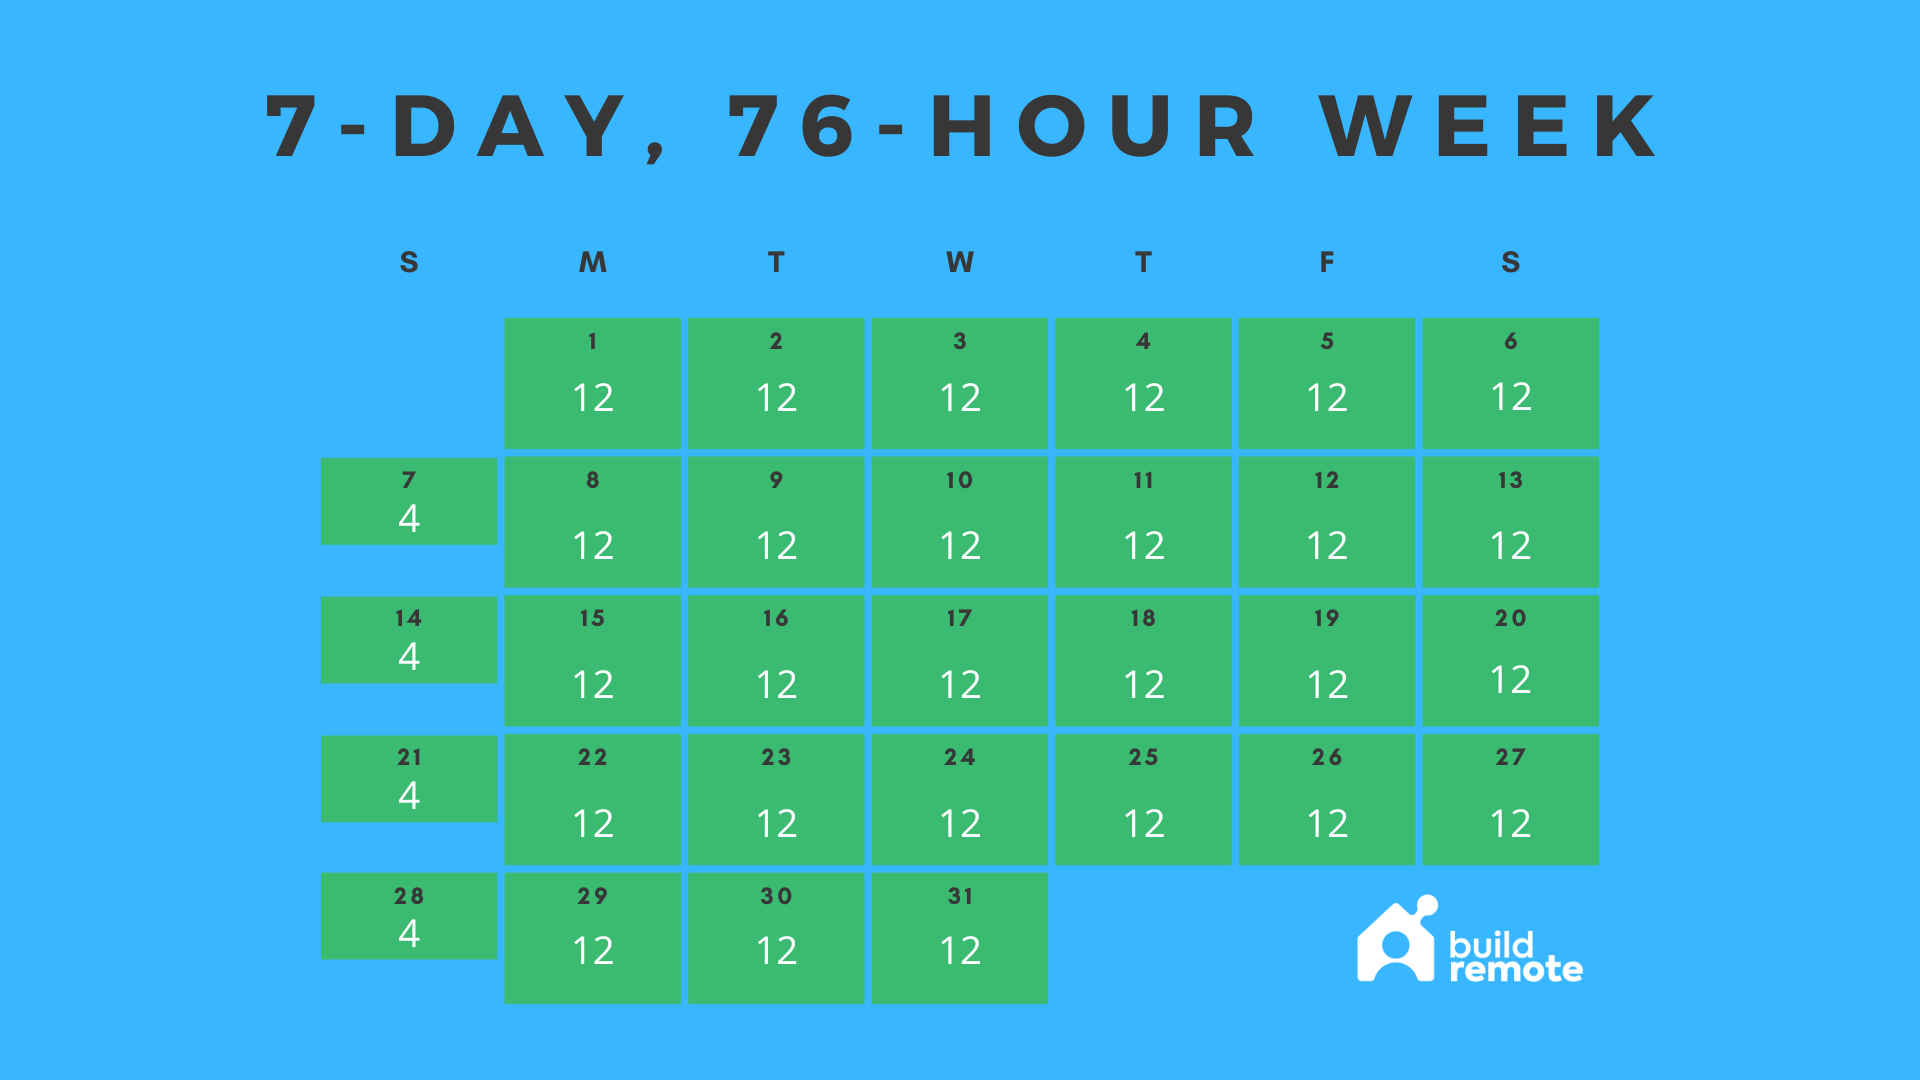 7-day work week (76-hours) template